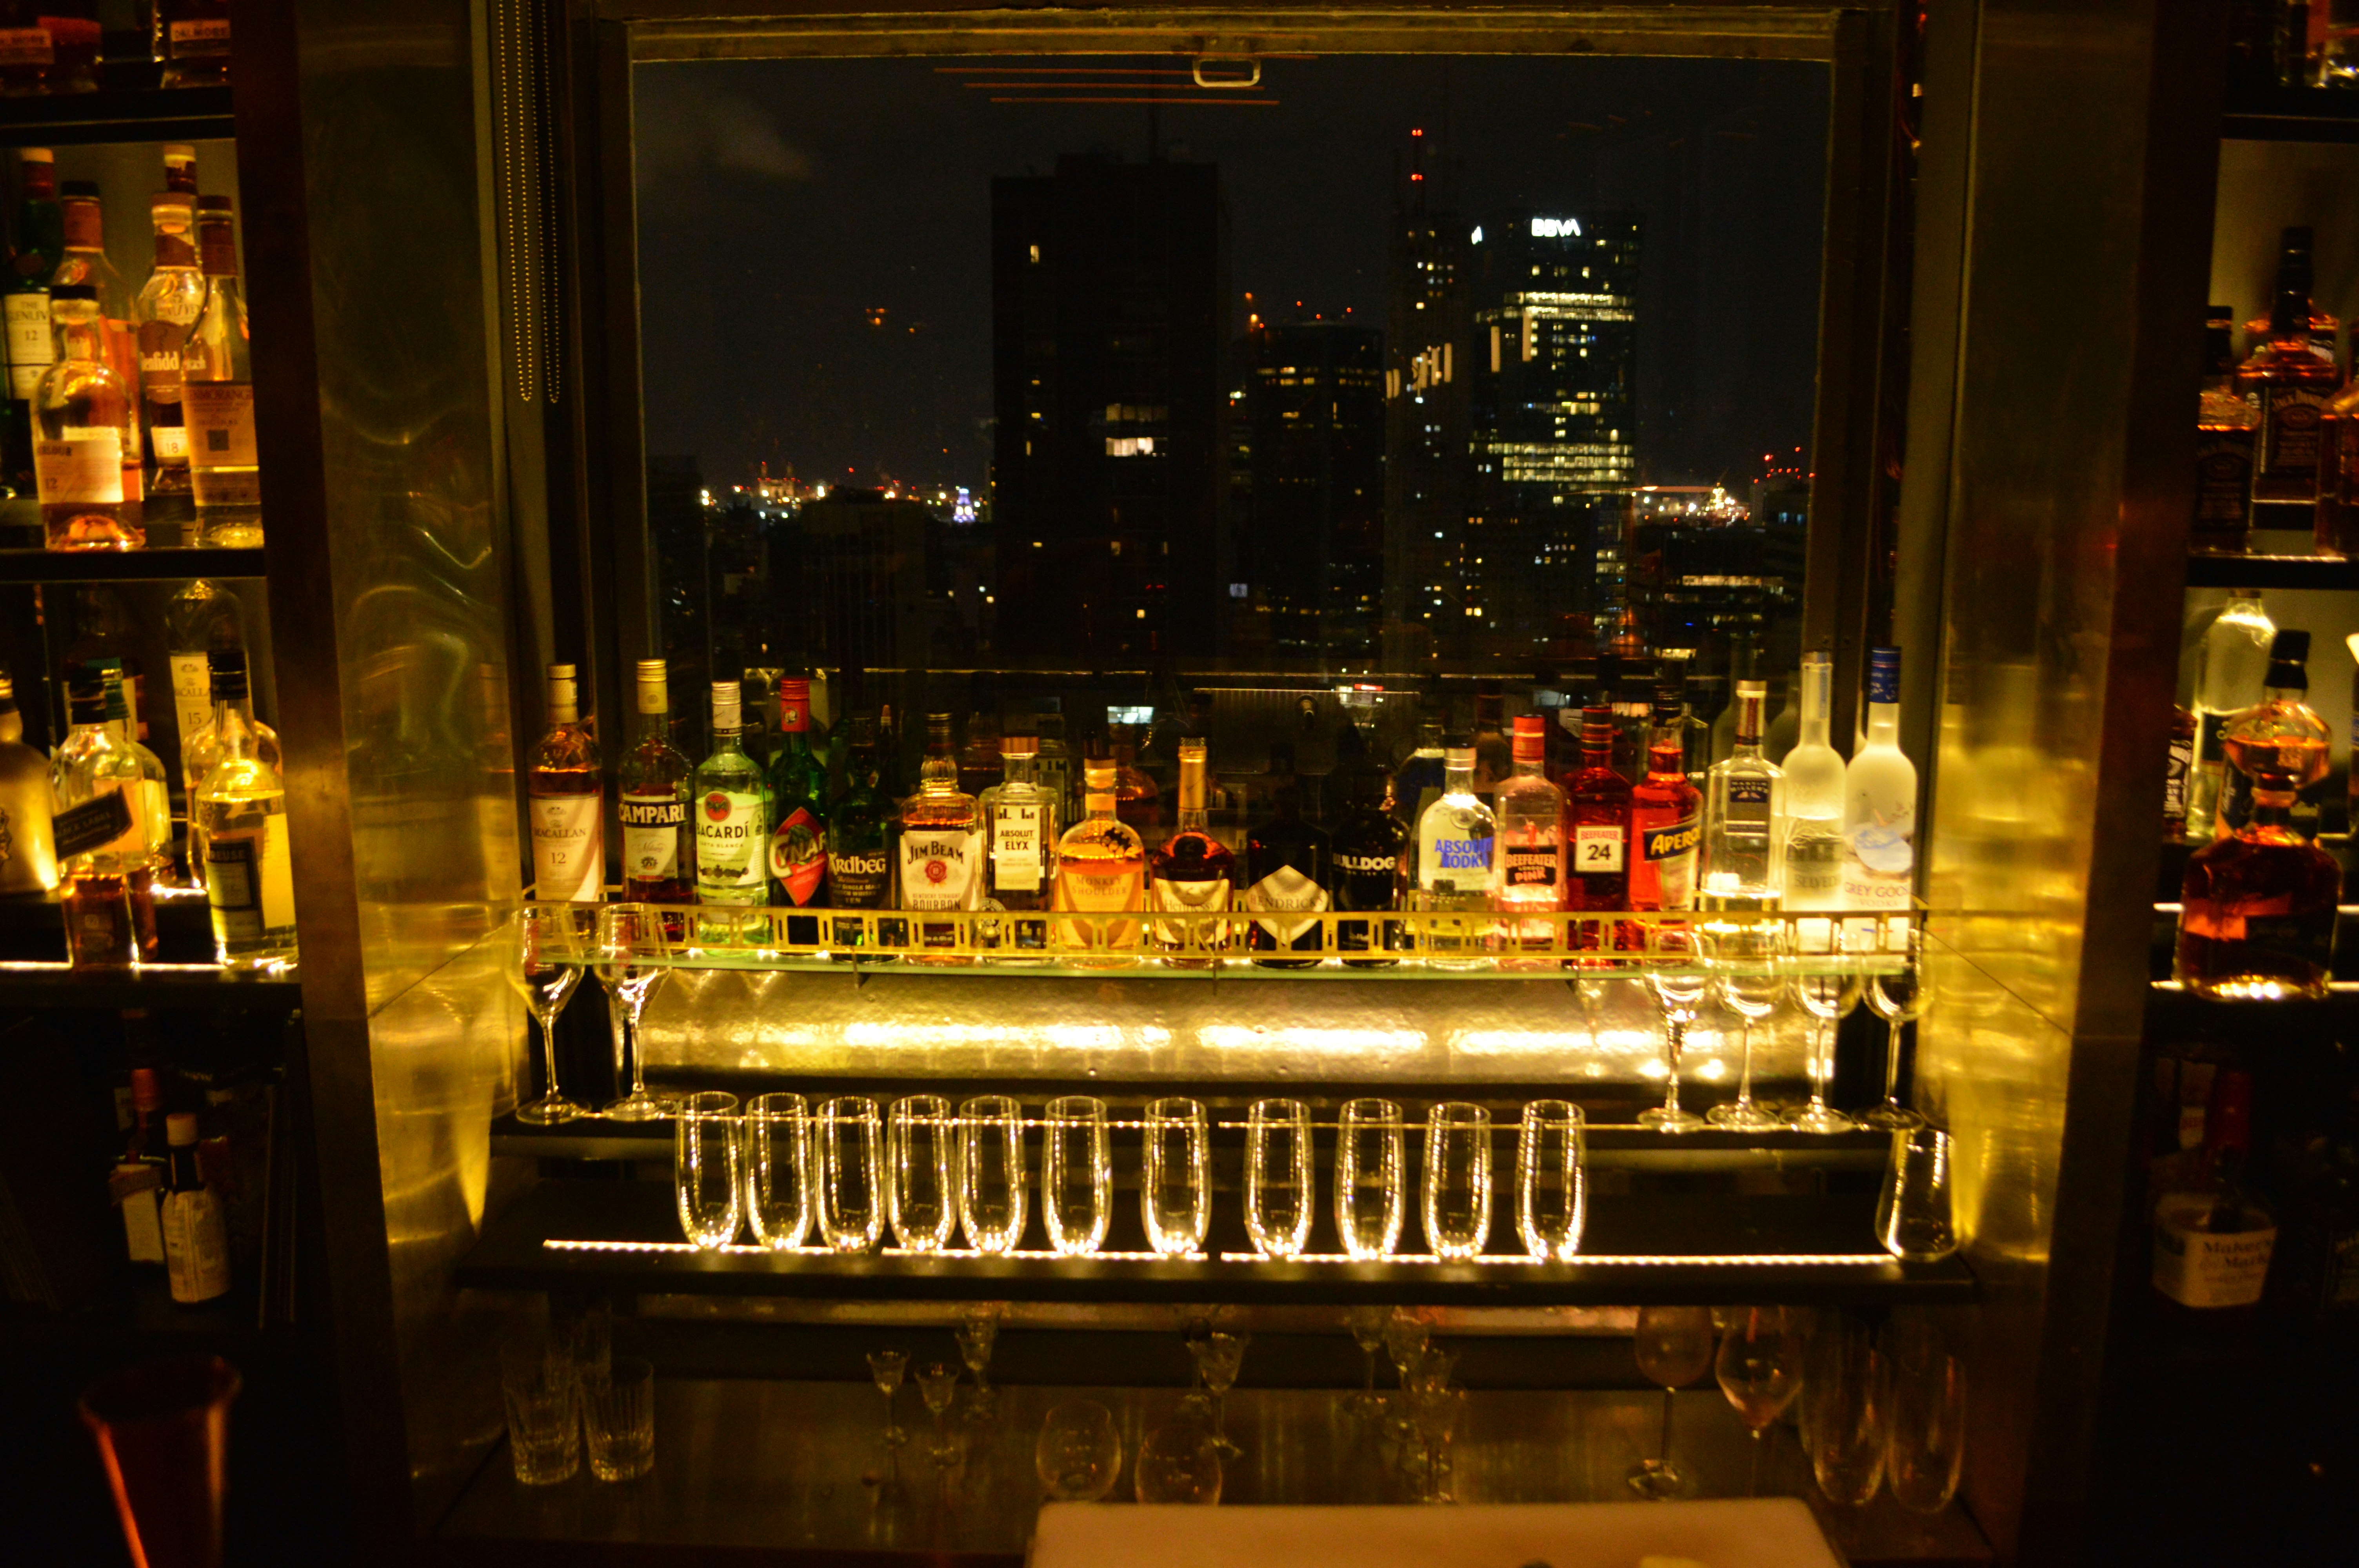 A row of liquor bottles frame a window overlooking the skyline of downtown Buenos Aires. There are a row of glasses on the lower ledge of the window that are glowing under the dim bar light